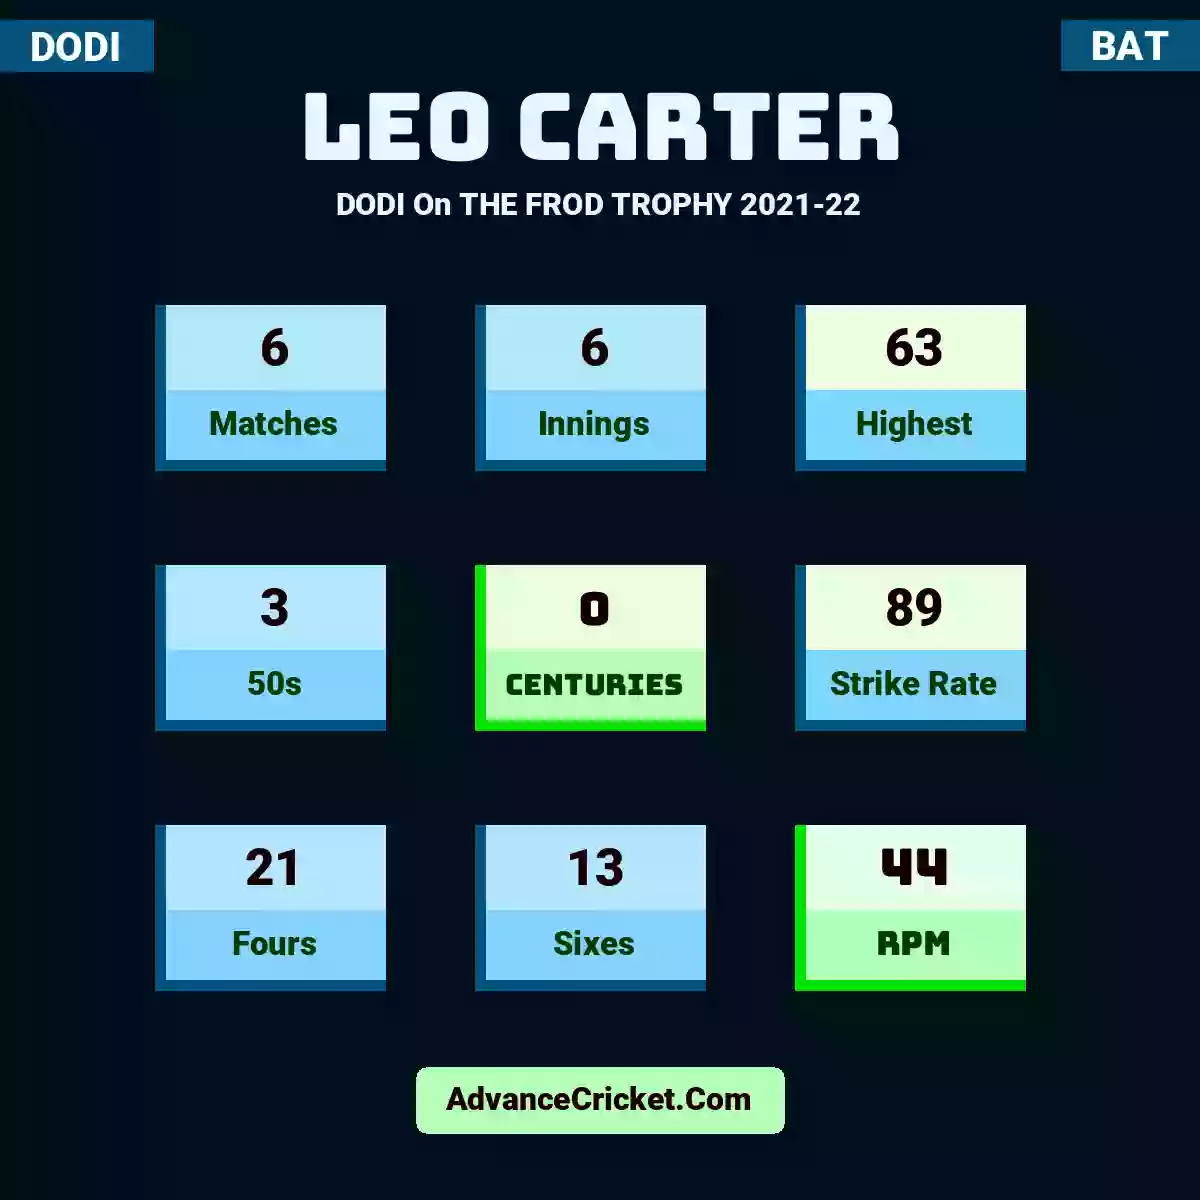 Leo Carter DODI  On THE FROD TROPHY 2021-22, Leo Carter played 6 matches, scored 63 runs as highest, 3 half-centuries, and 0 centuries, with a strike rate of 89. L.Carter hit 21 fours and 13 sixes, with an RPM of 44.